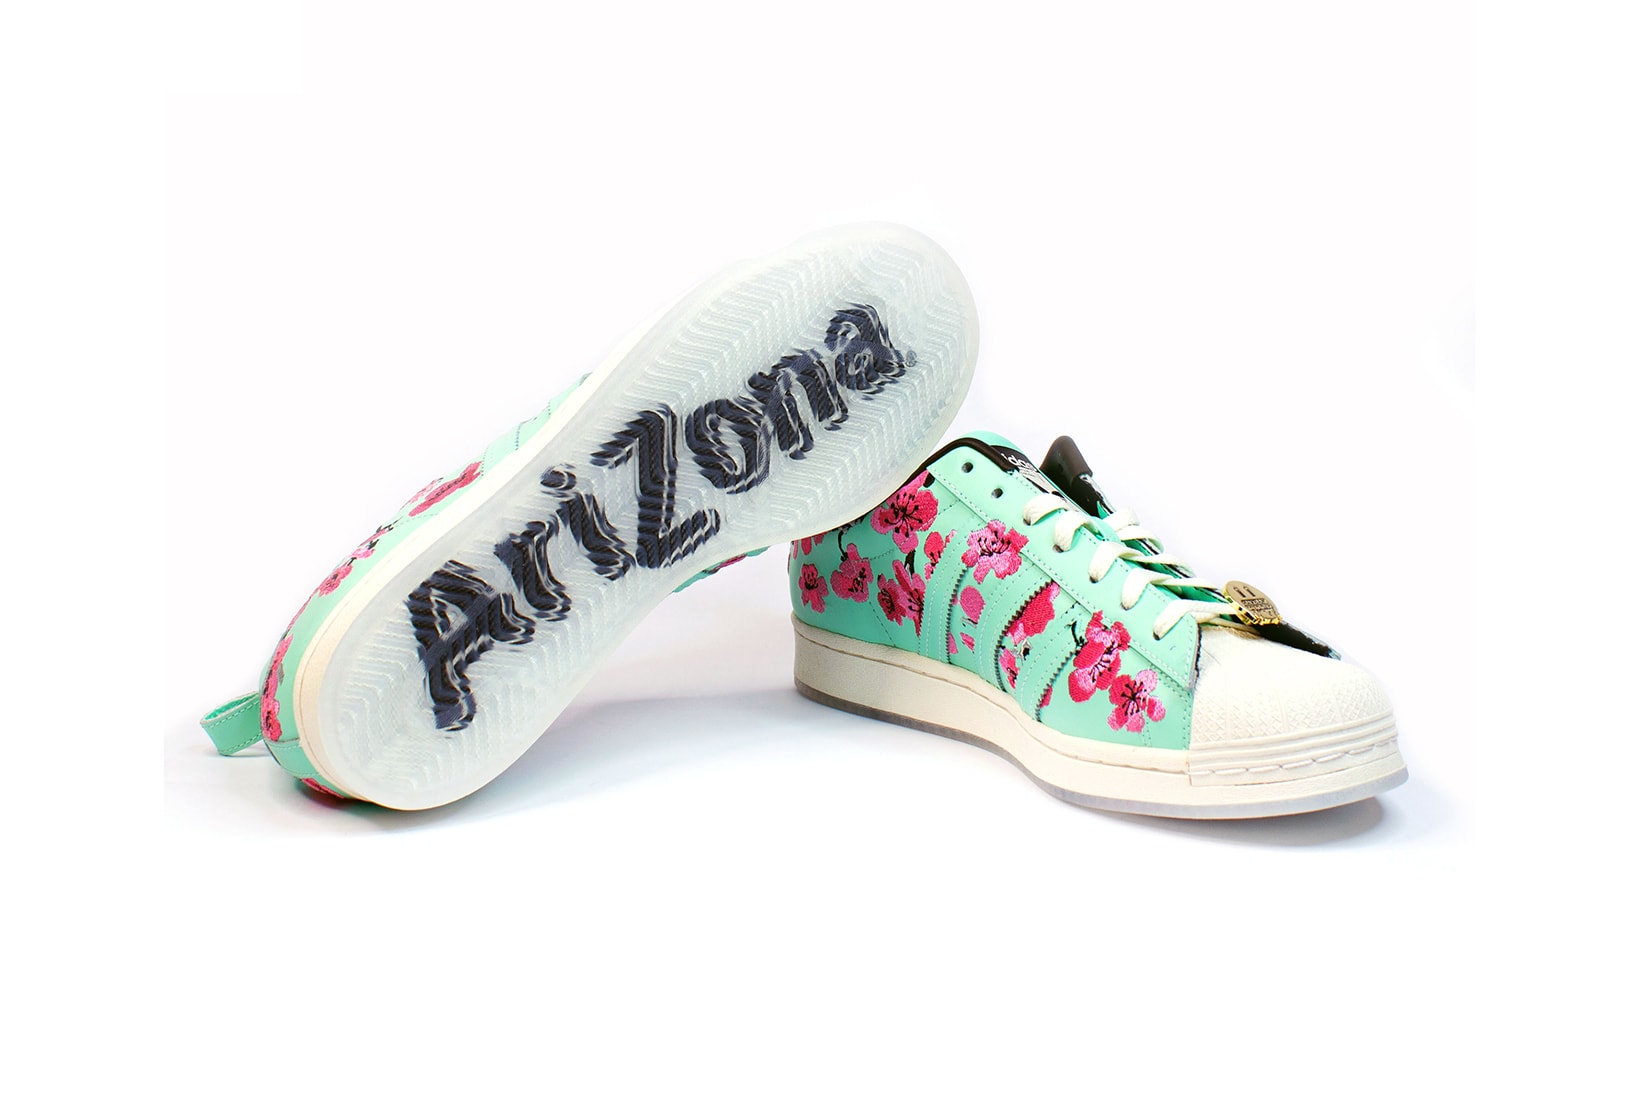 adidas originals arizona iced tea superstar collaboration sneakers big cans sole teal blue pink flowers white laces gold